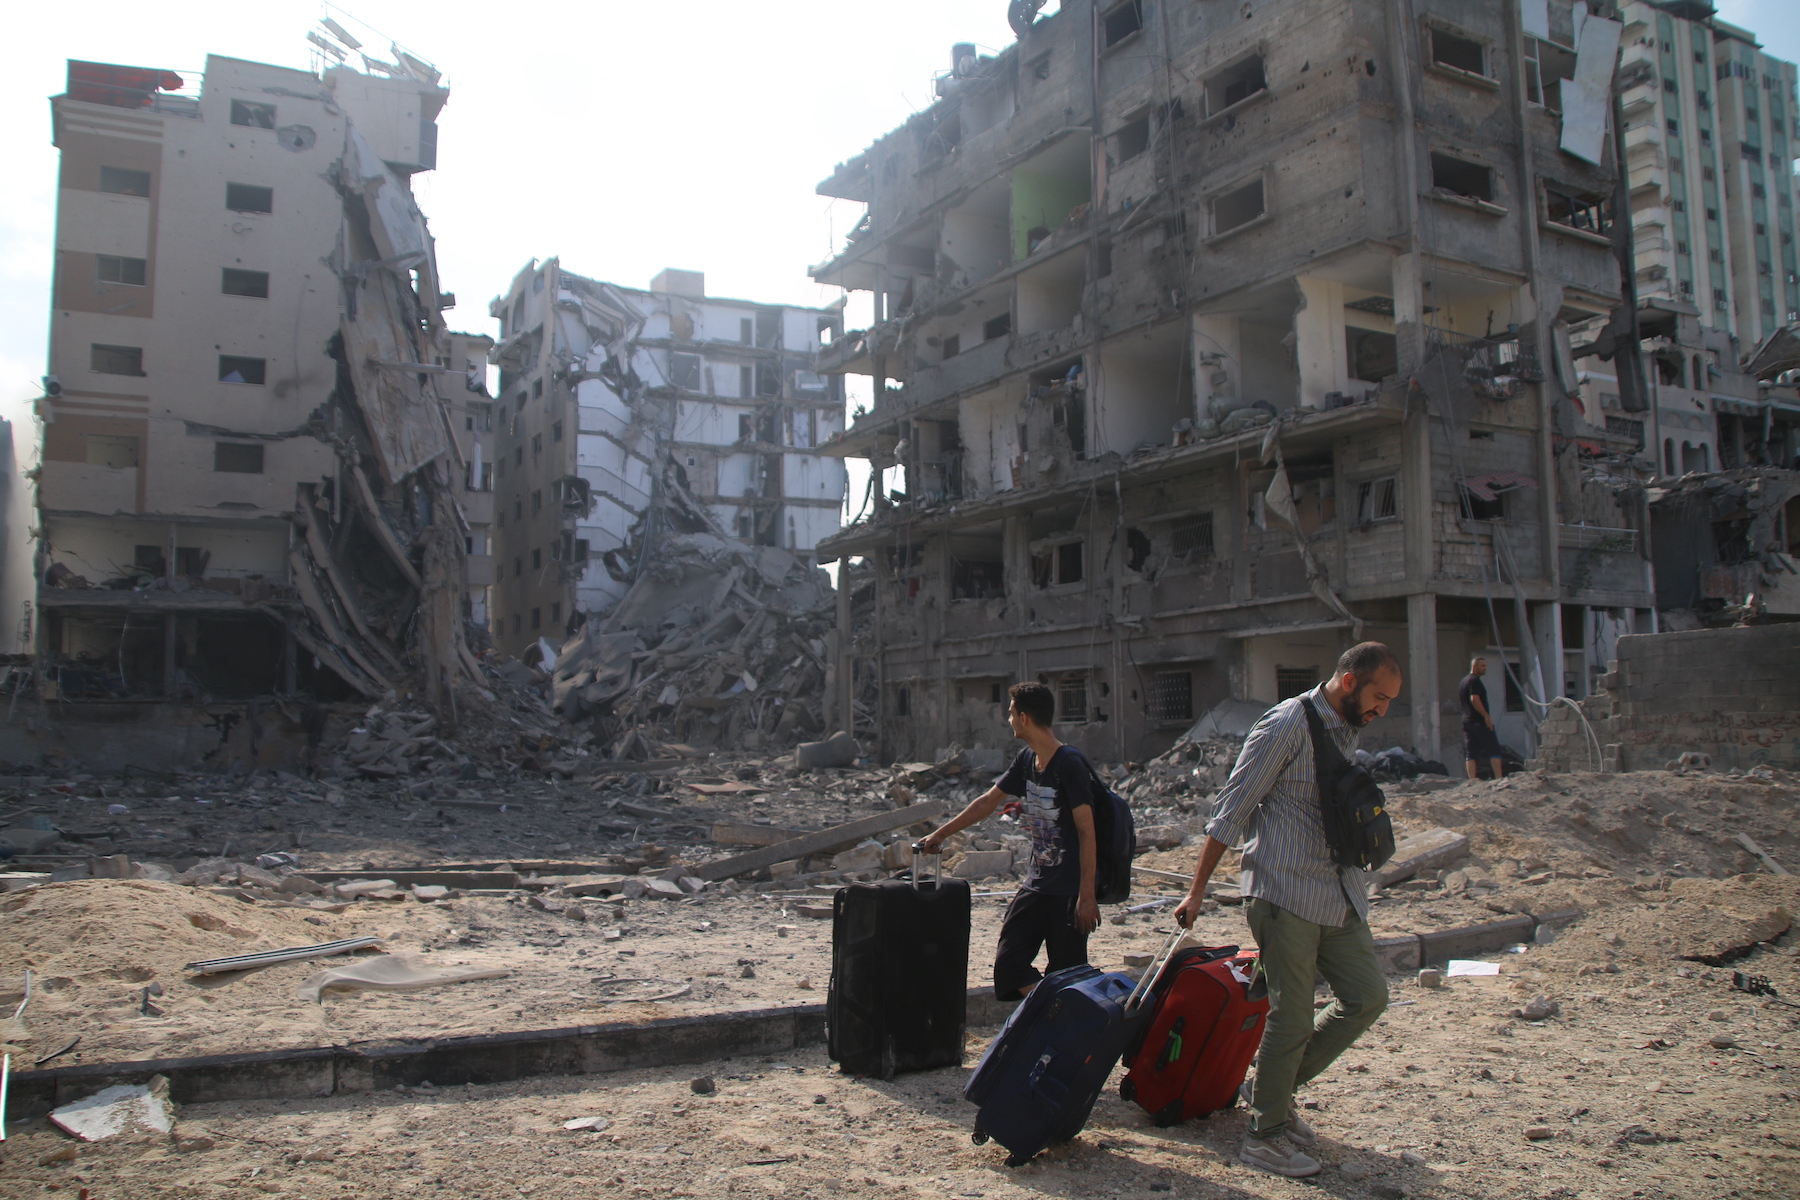 Palestinian citizens evacuate their homes damaged by Israeli airstrikes